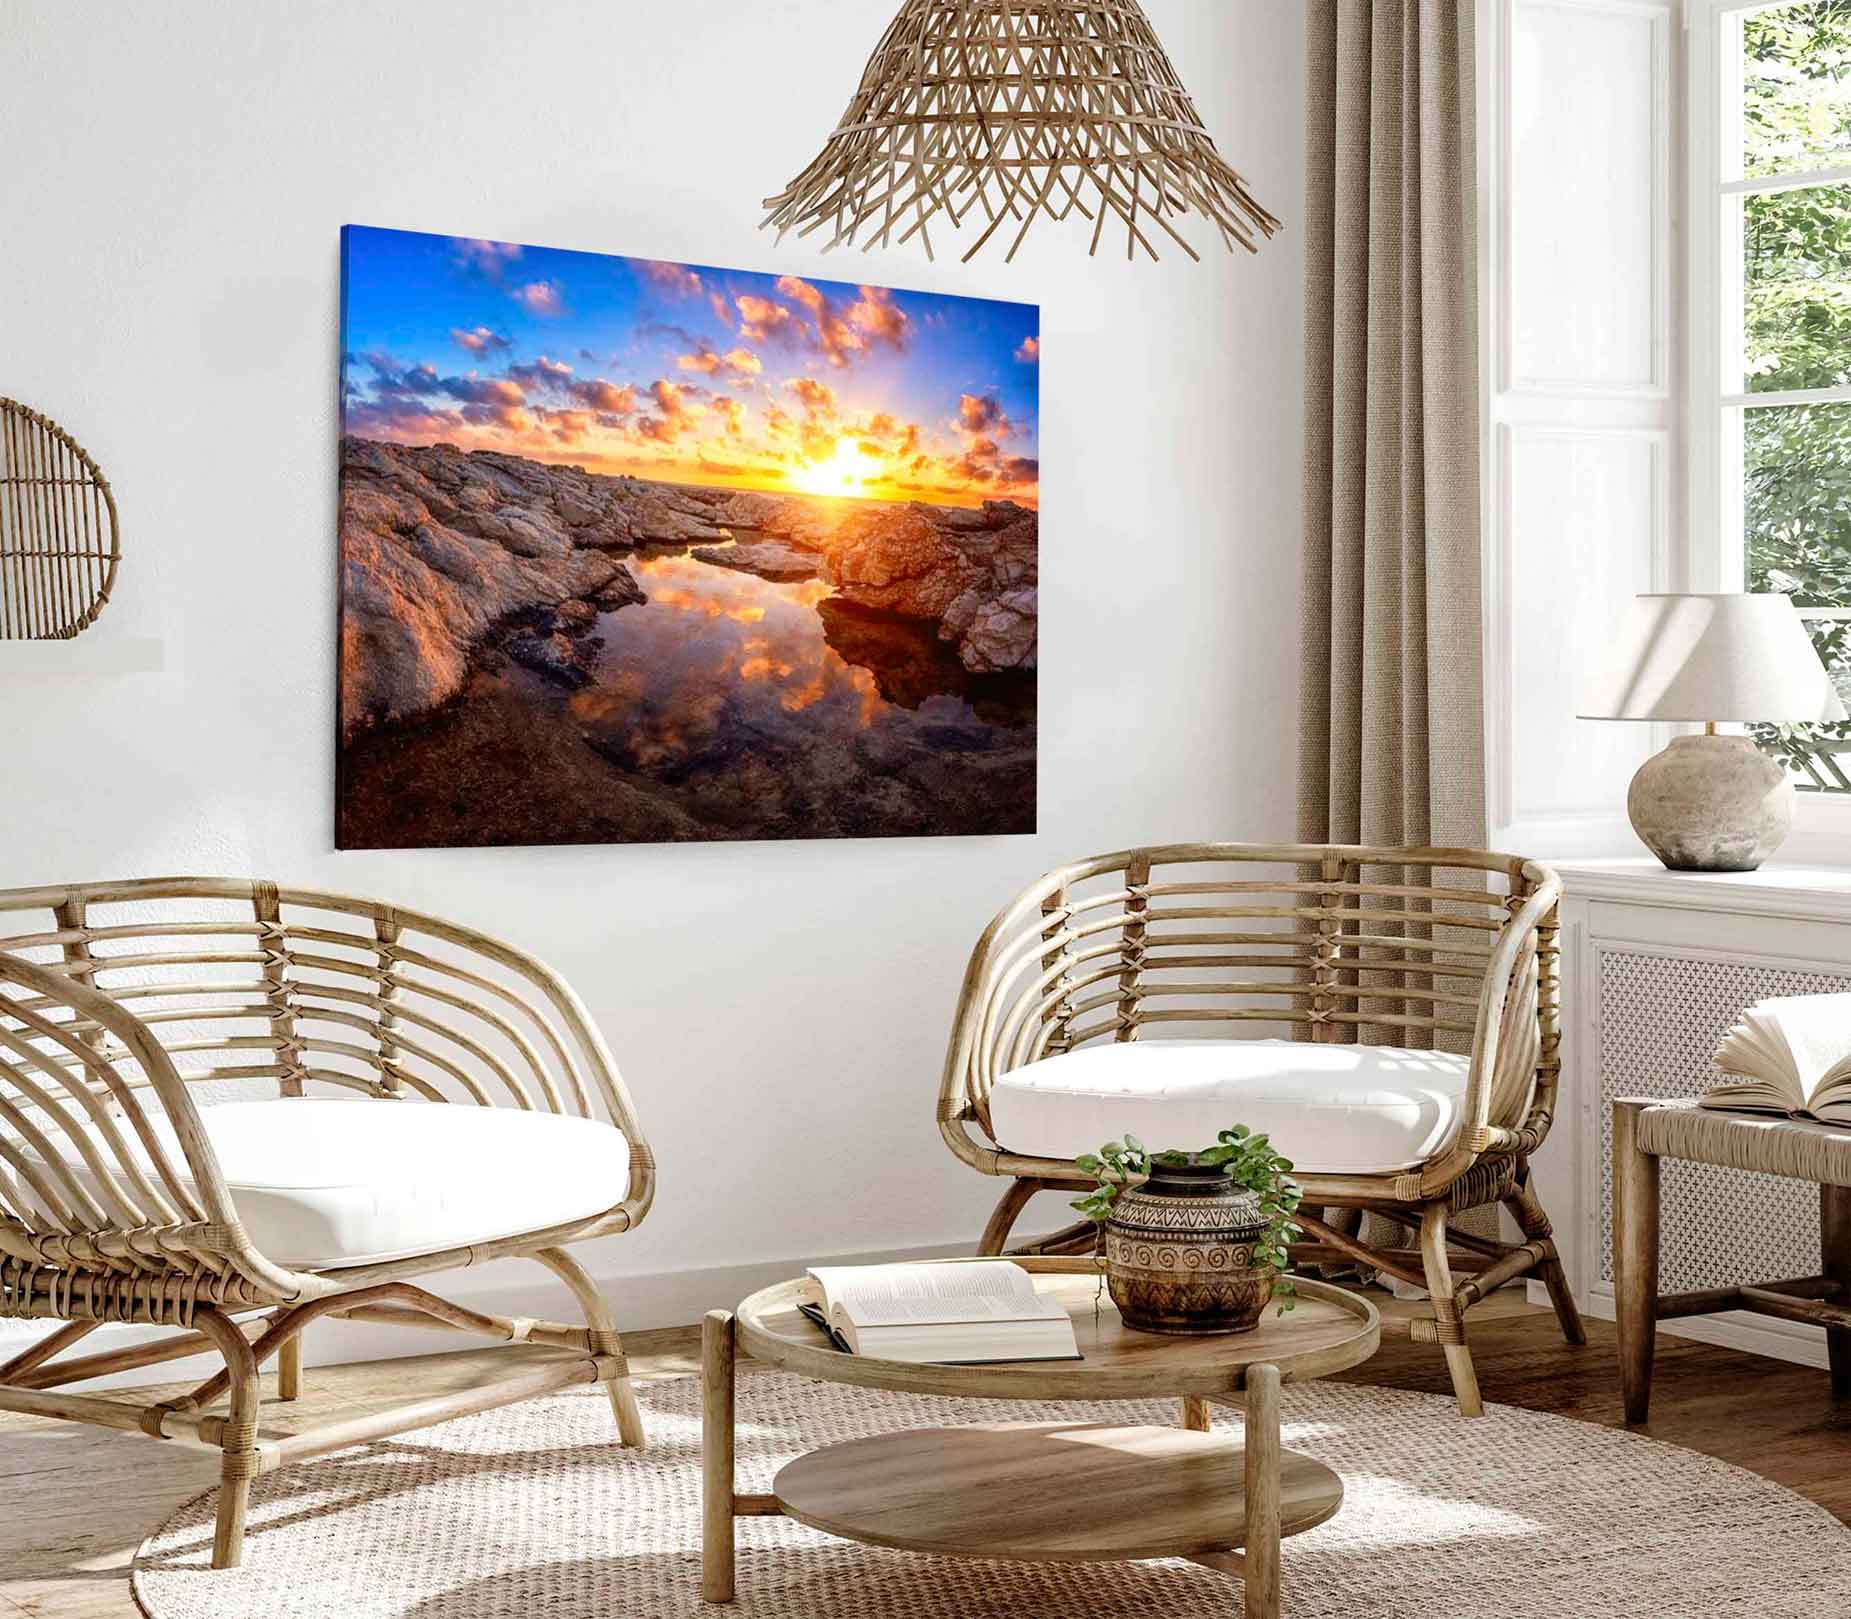 Bella Home Rocks with Sun & Cloudy Sky Sunset Print Canvas Ready to hang